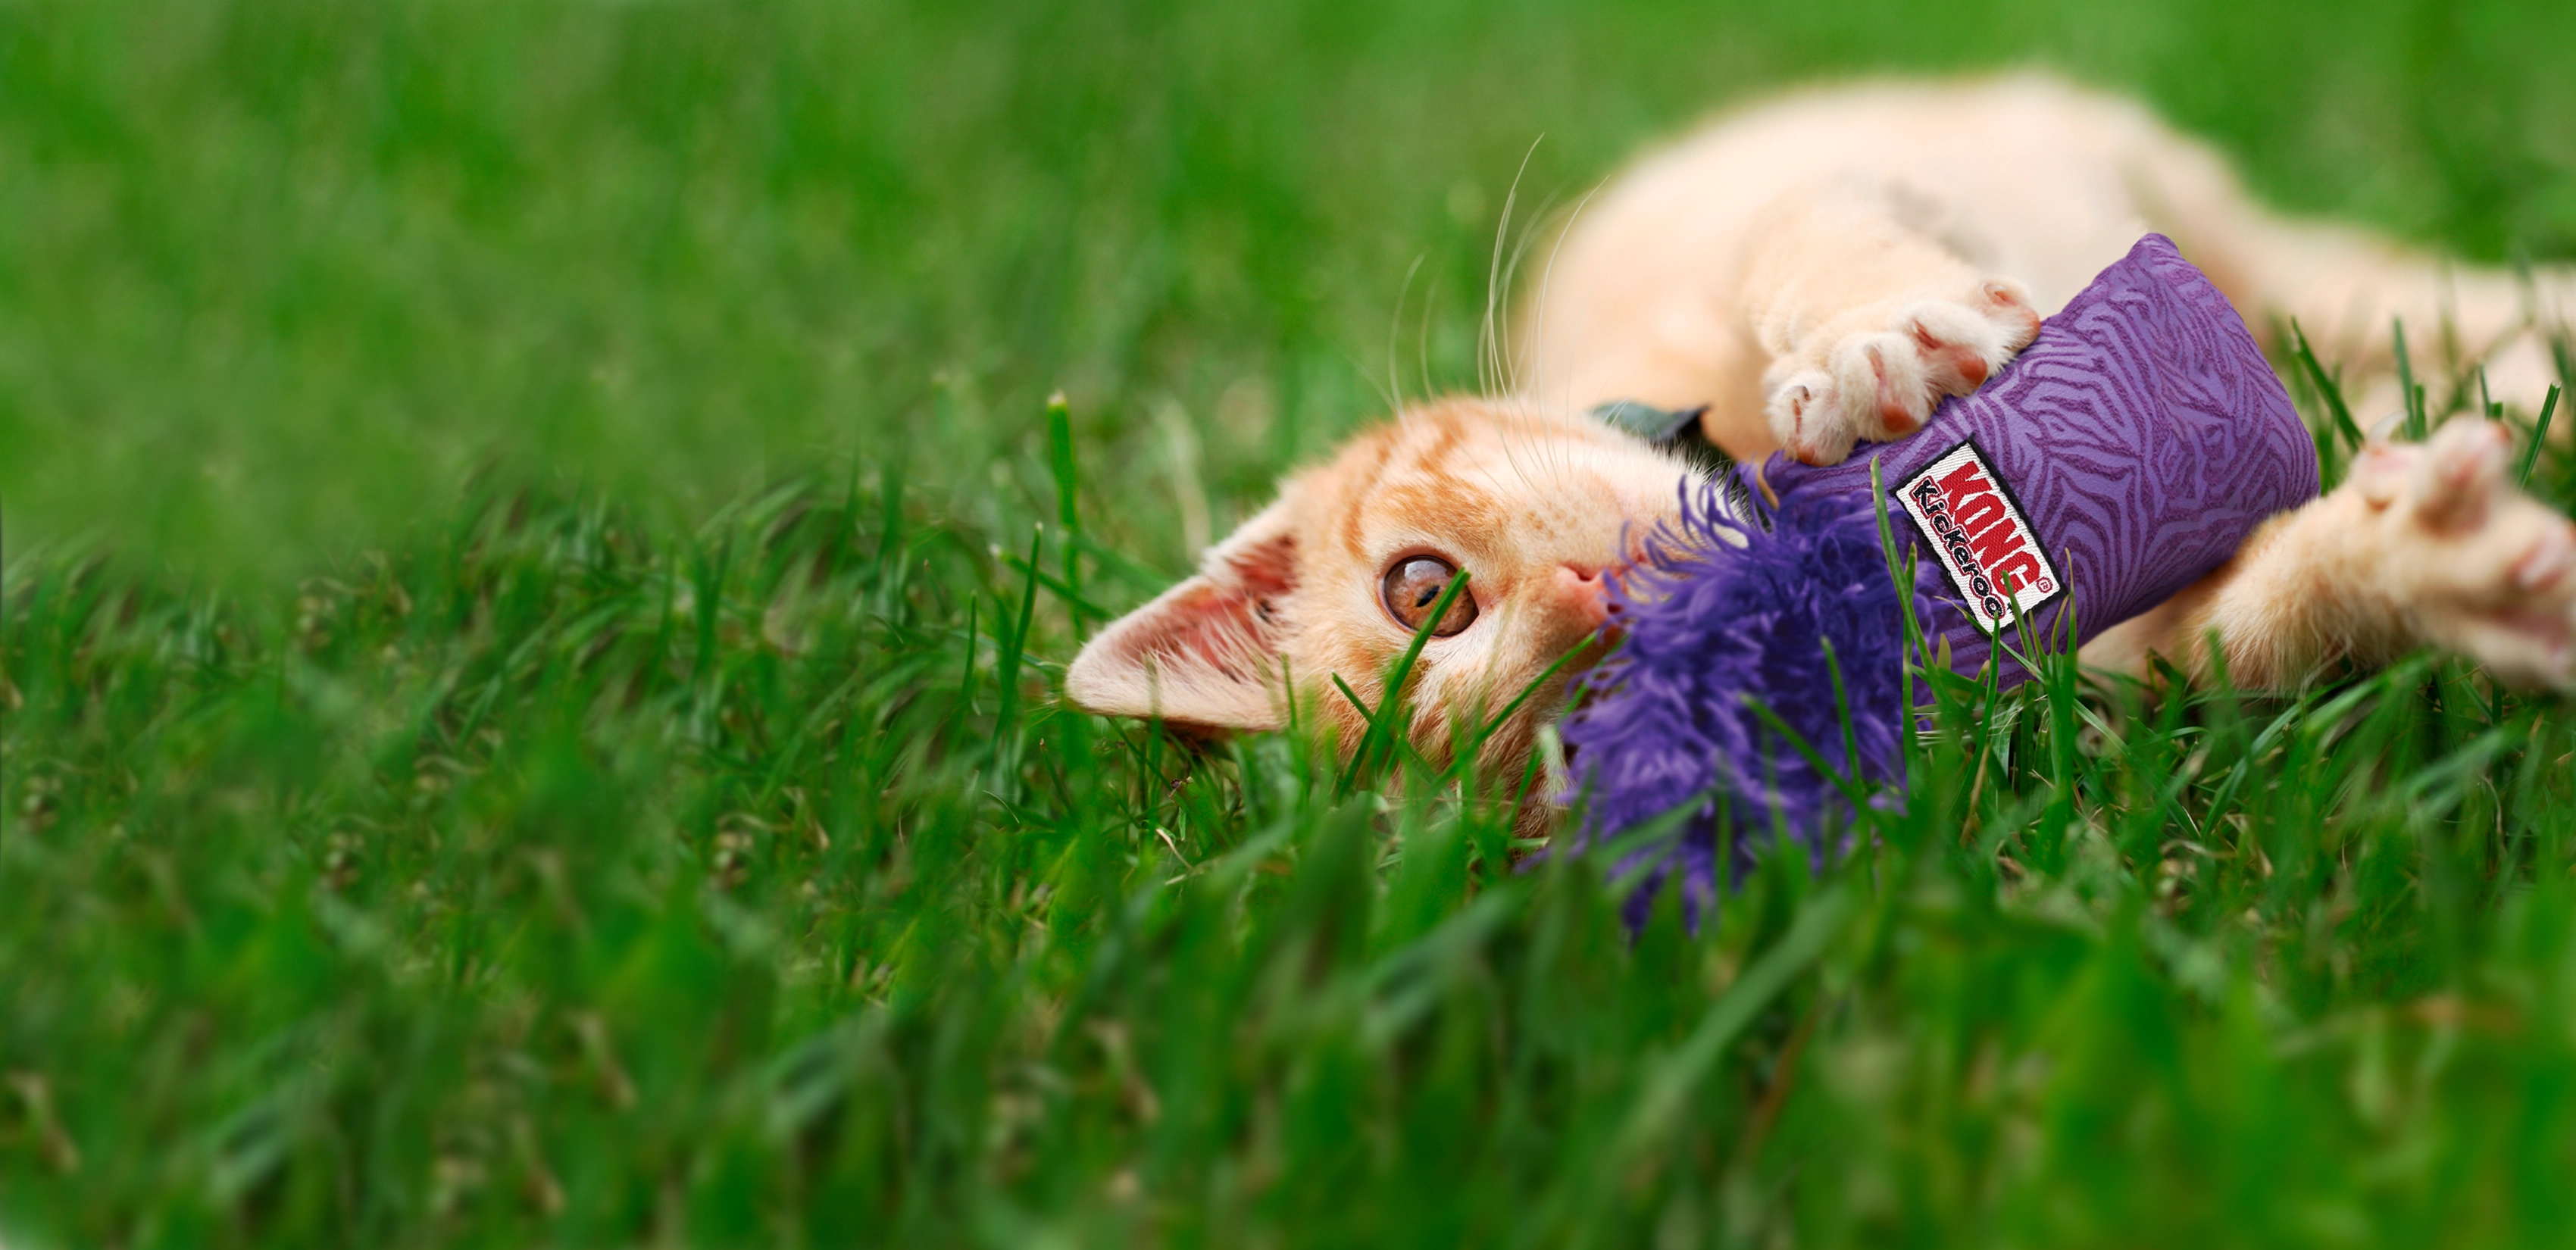 Cat playing with a KONG kickeroo in the grass.